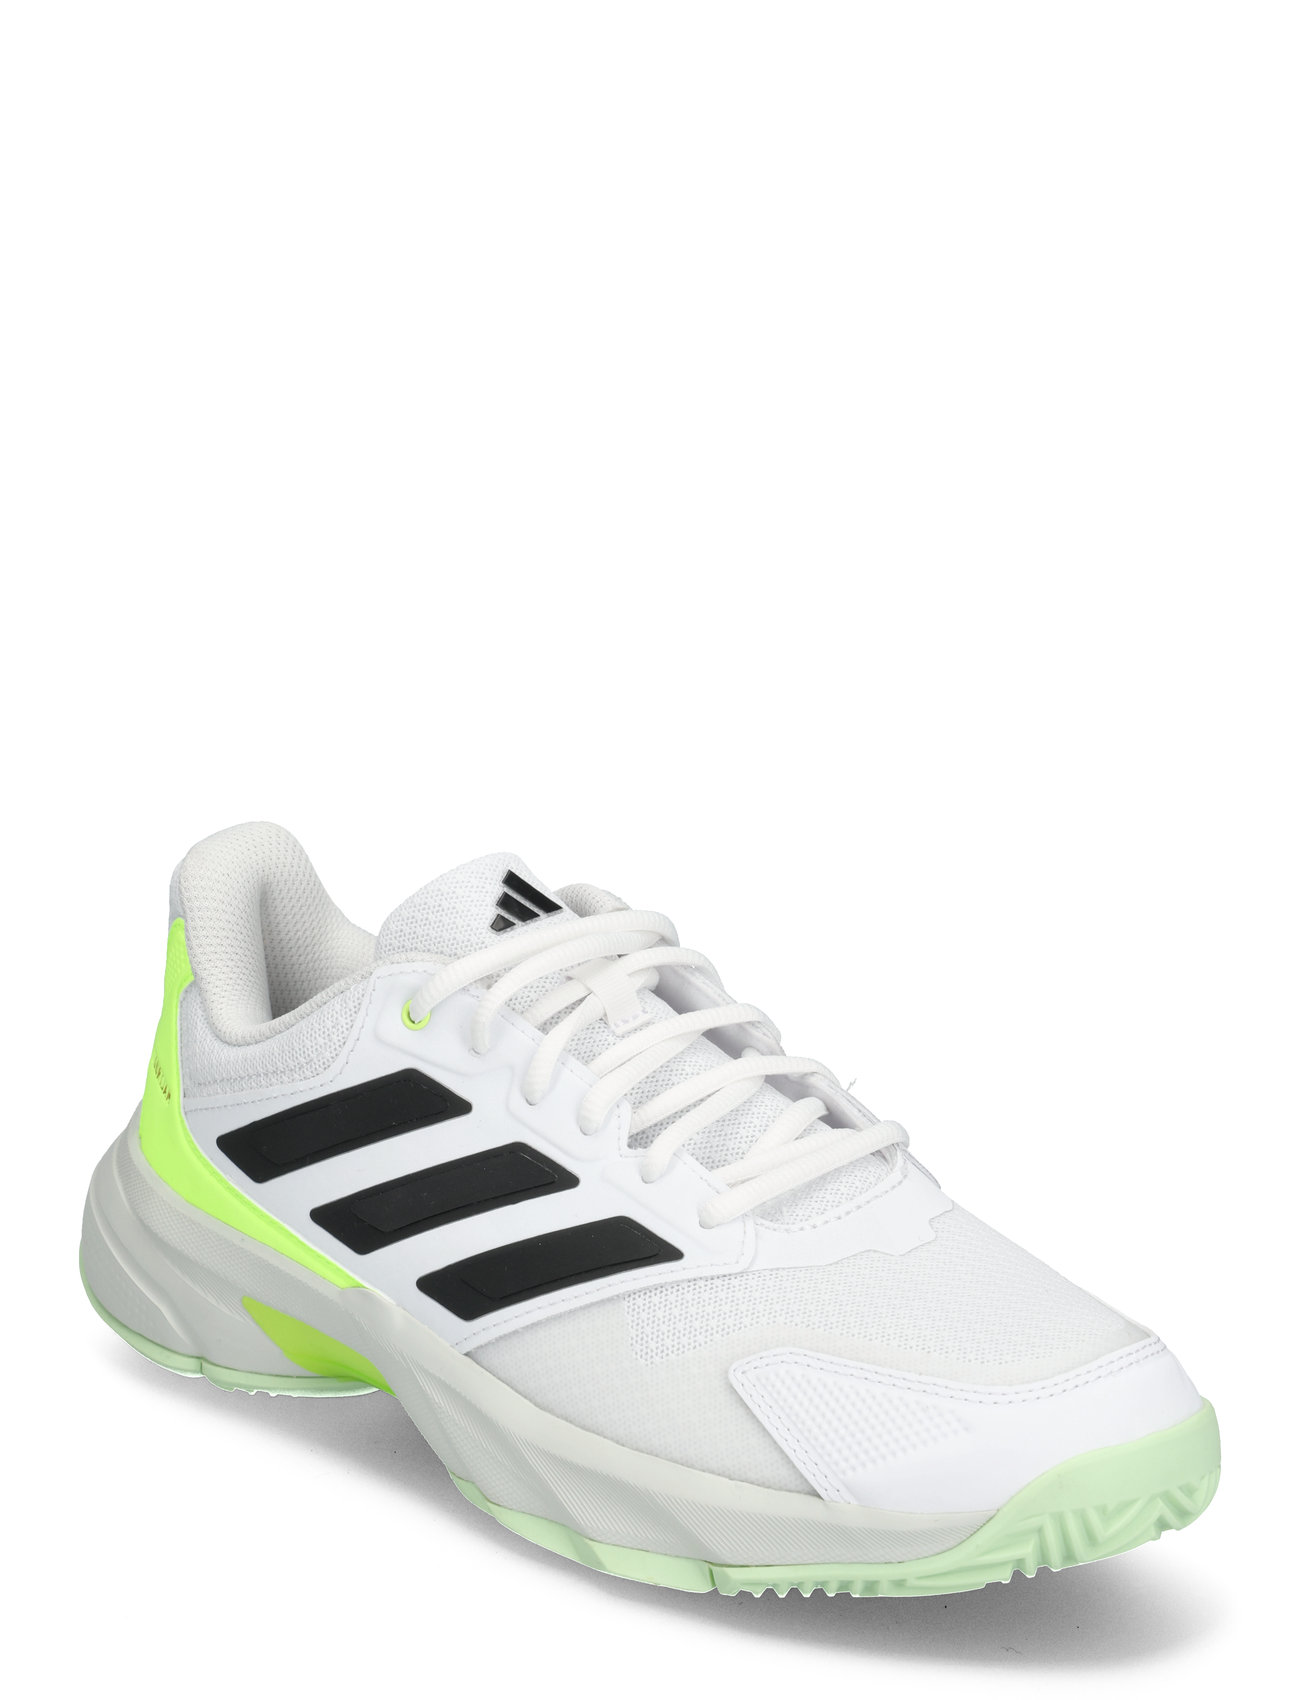 Courtjam Control 3 M Sport Sport Shoes Racketsports Shoes Tennis Shoes White Adidas Performance